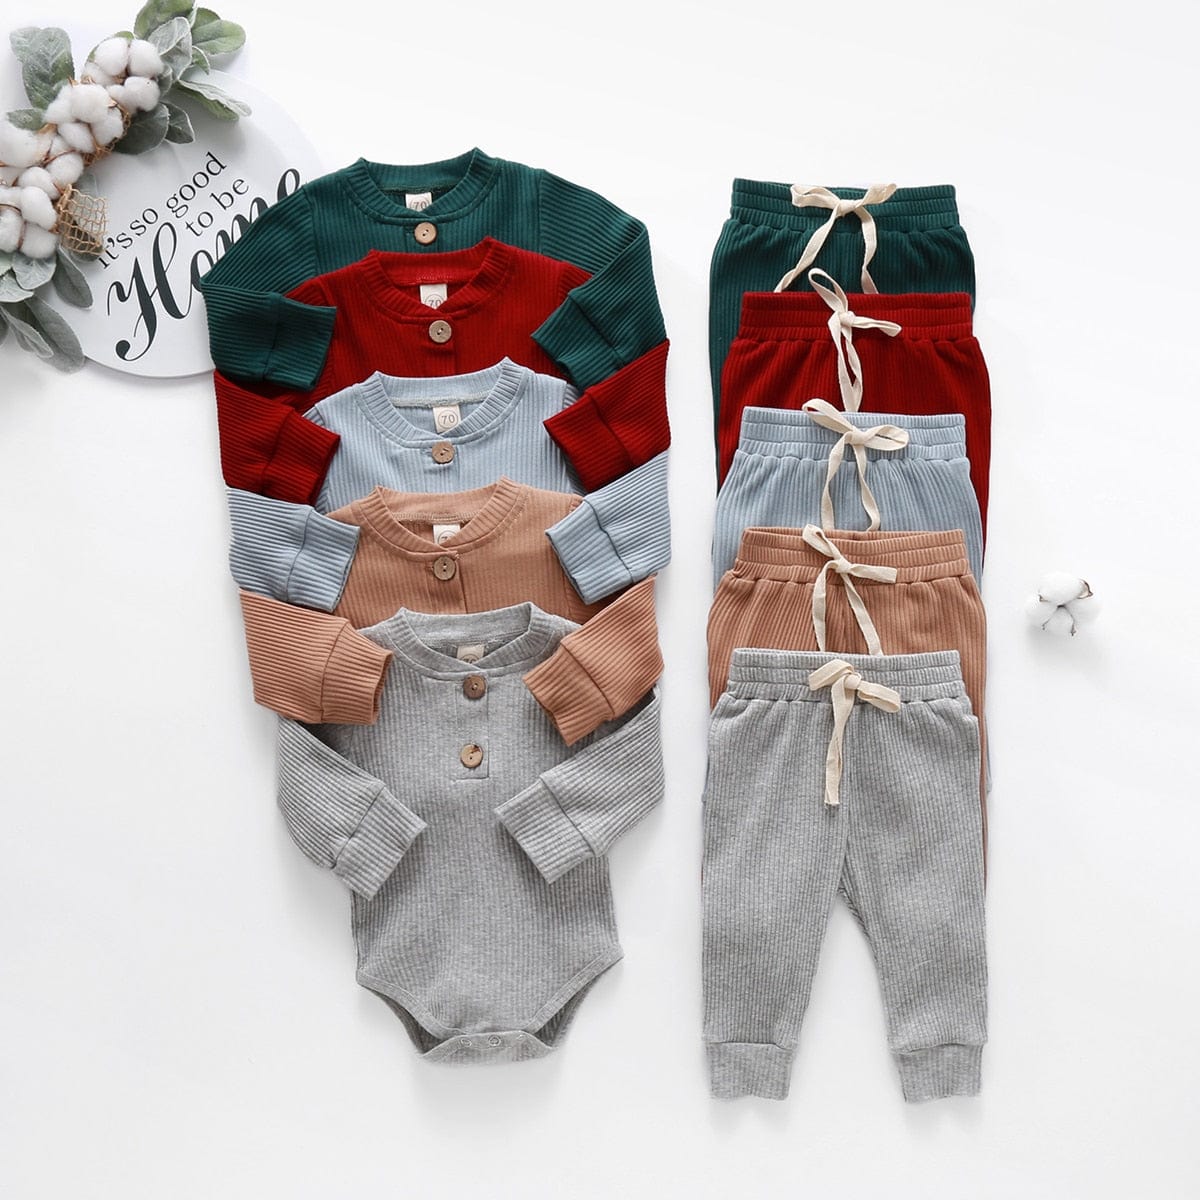 Boy's Cuddle Up Uni Romper: Knit Onesie for a Cozy Look